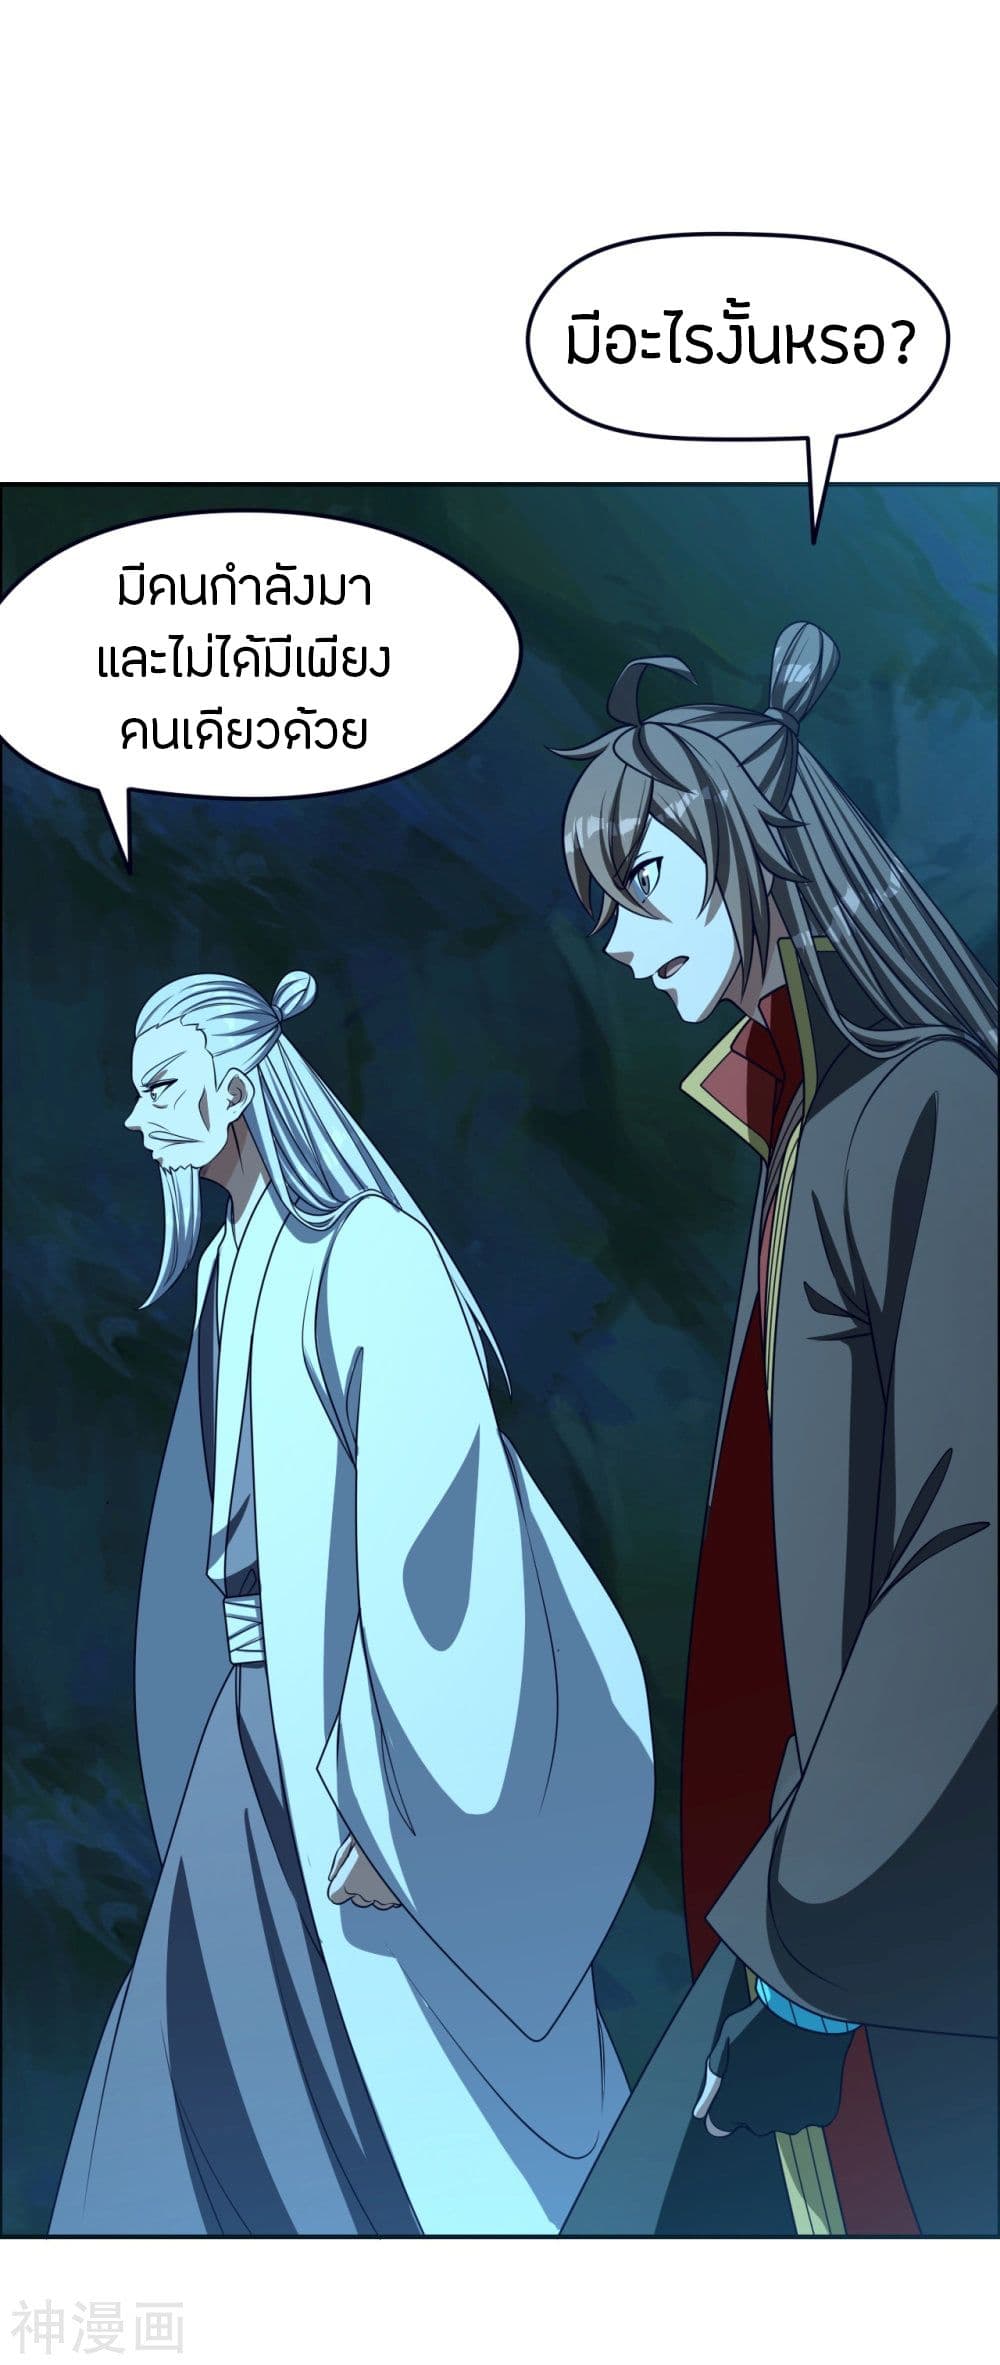 Banished Disciple's Counterattack เธเธฑเธเธฃเธเธฃเธฃเธ”เธดเน€เธเธตเธขเธเธขเธธเธ—เธ 239 (71)